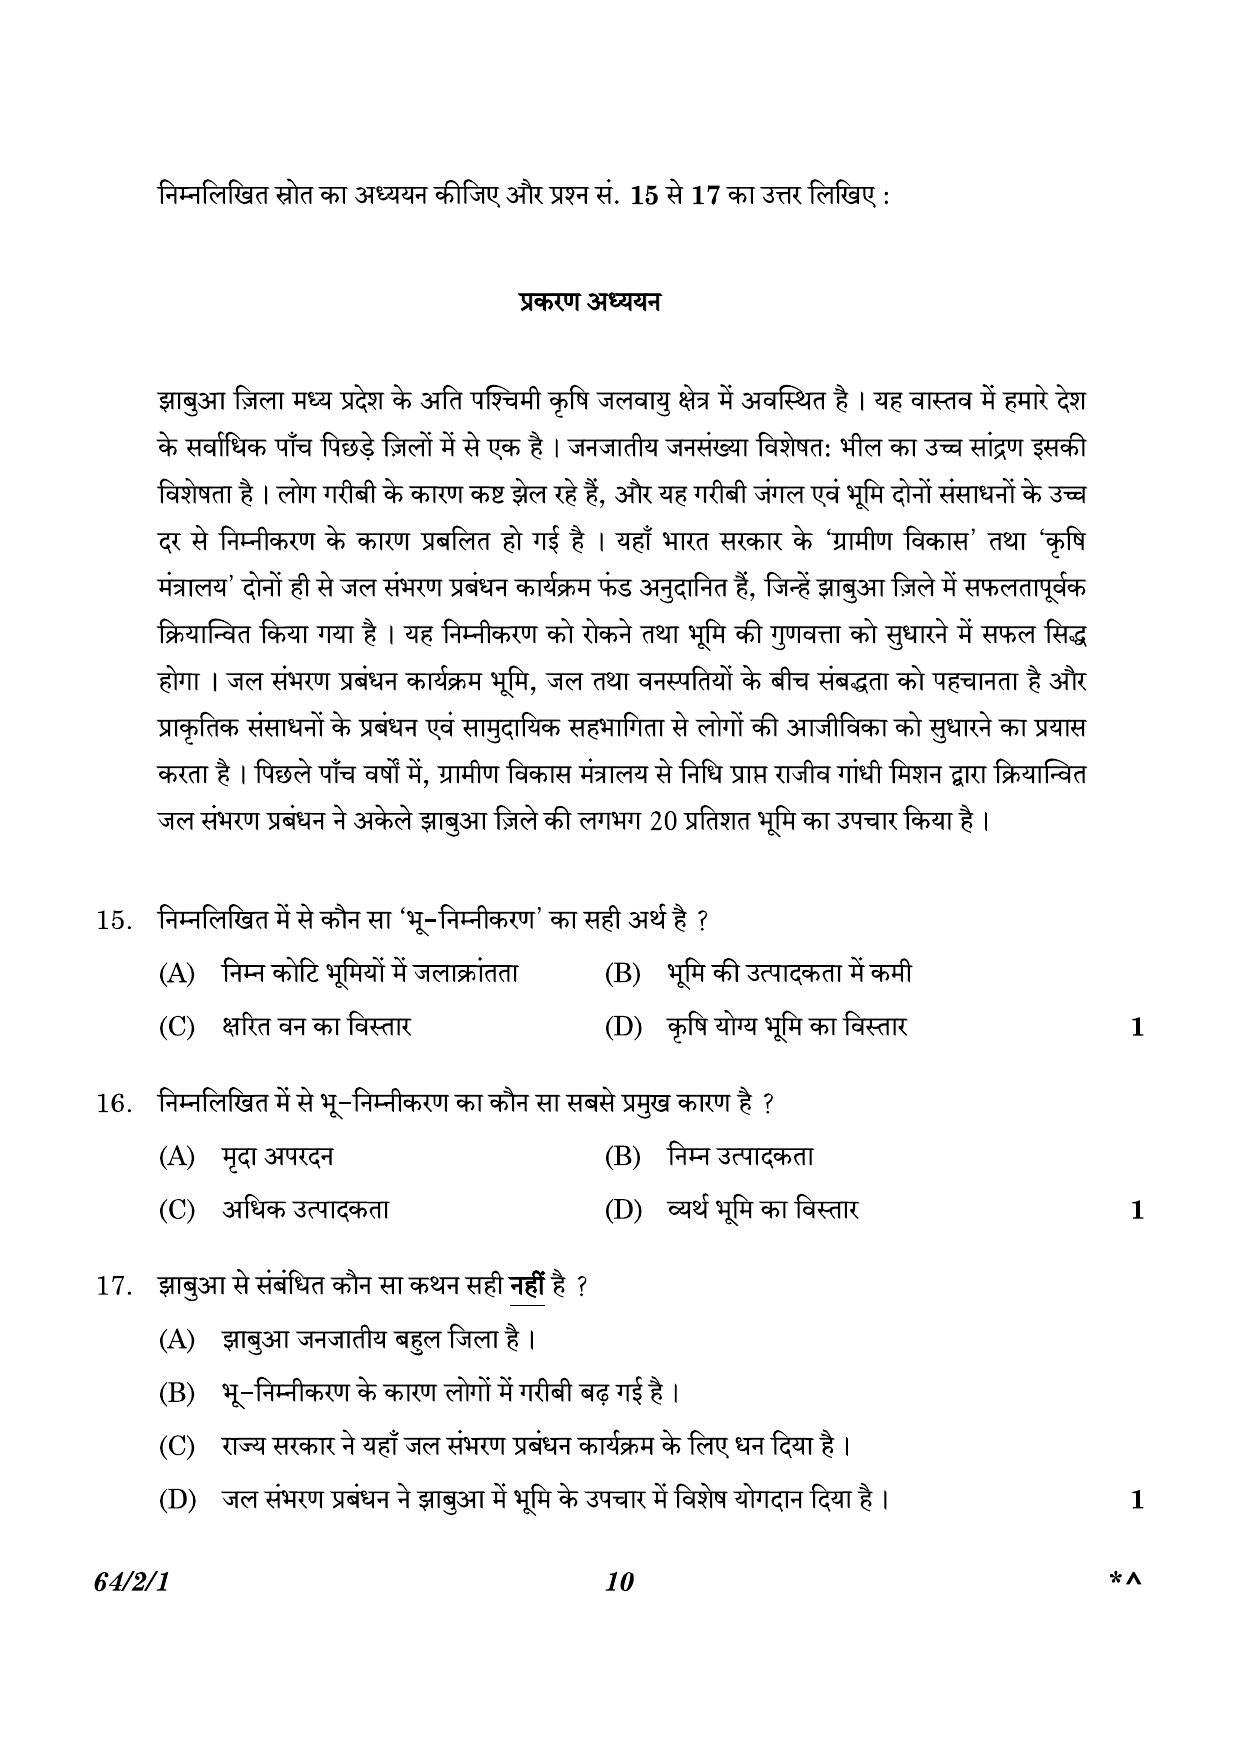 CBSE Class 12 64-2-1 Geography 2023 Question Paper - Page 10